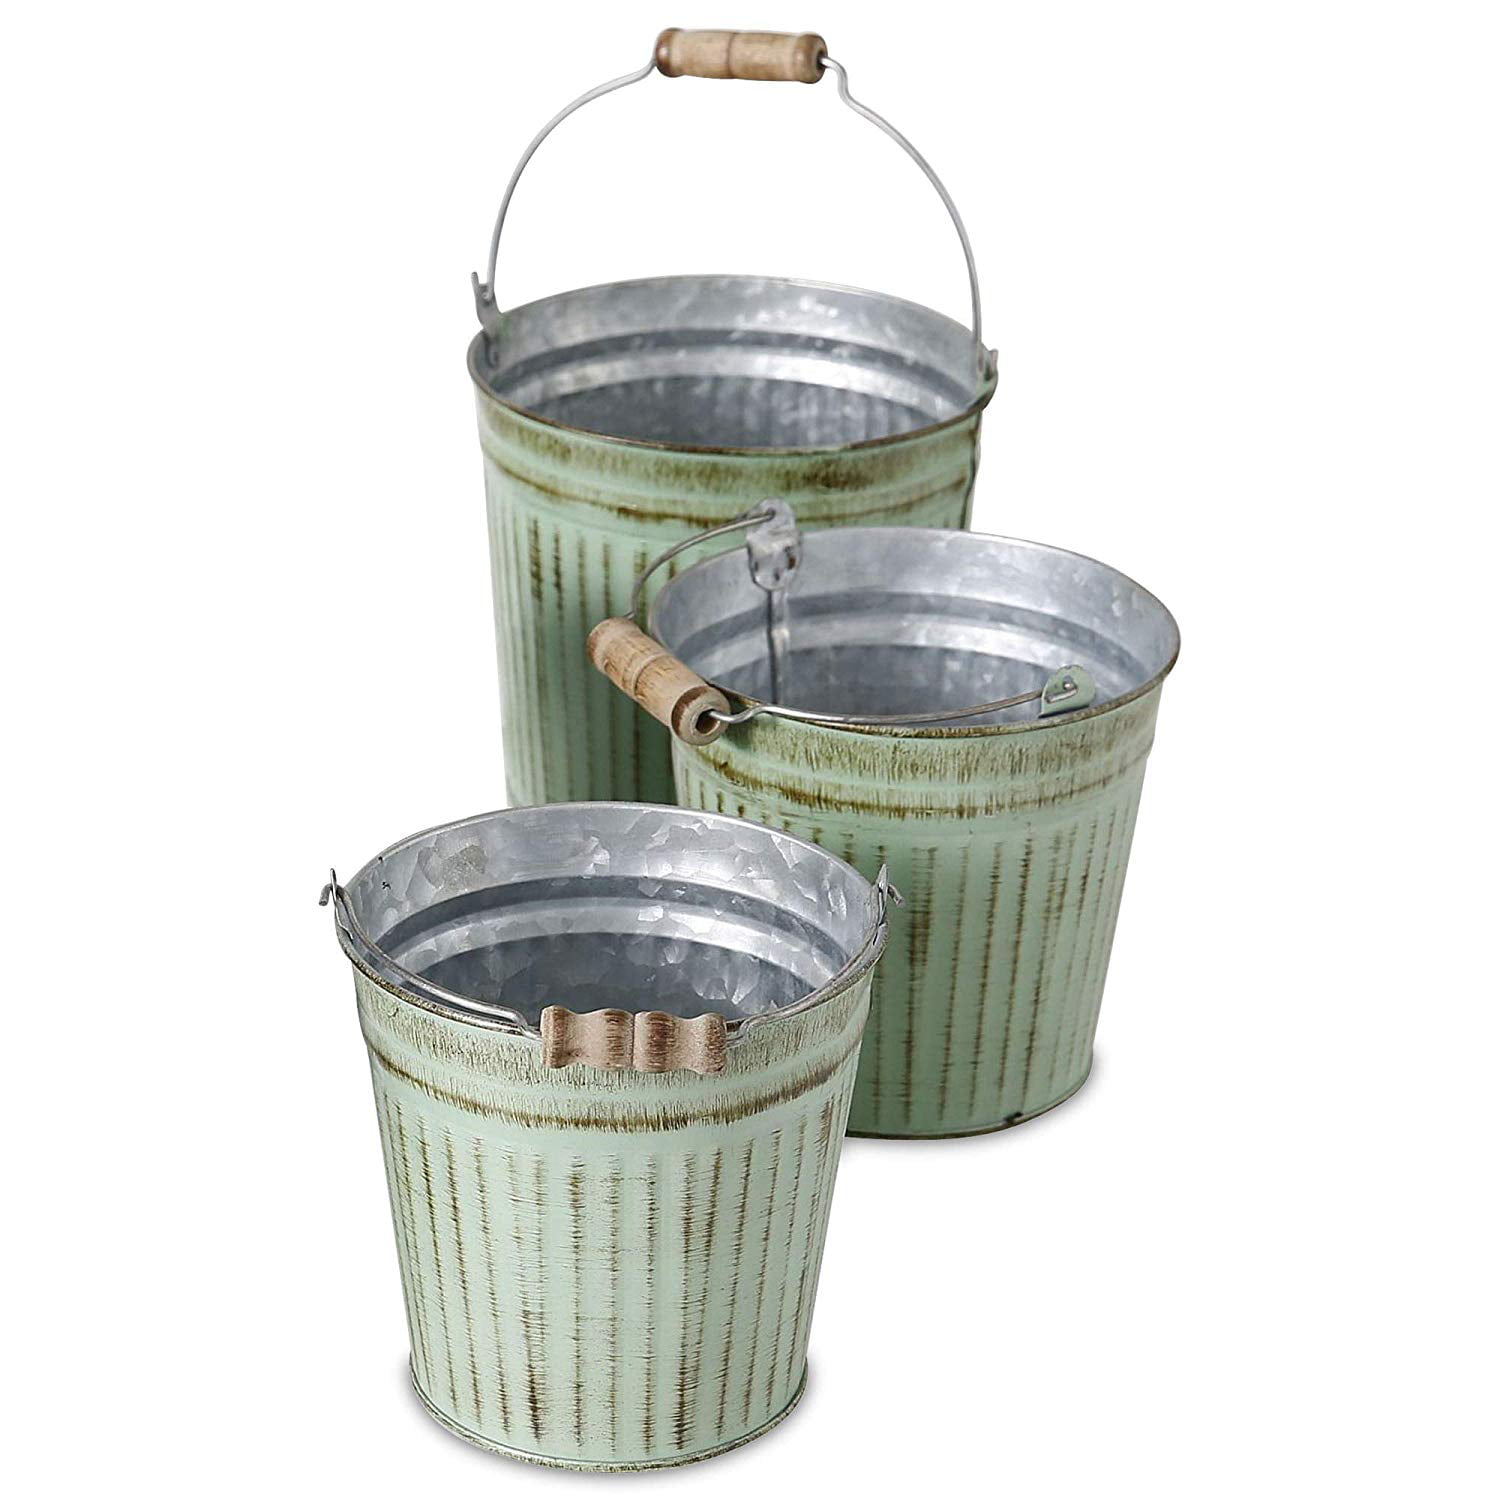 French Country Pail Planters, Set of 3, Bucket Cache Pot Jardinieres ...